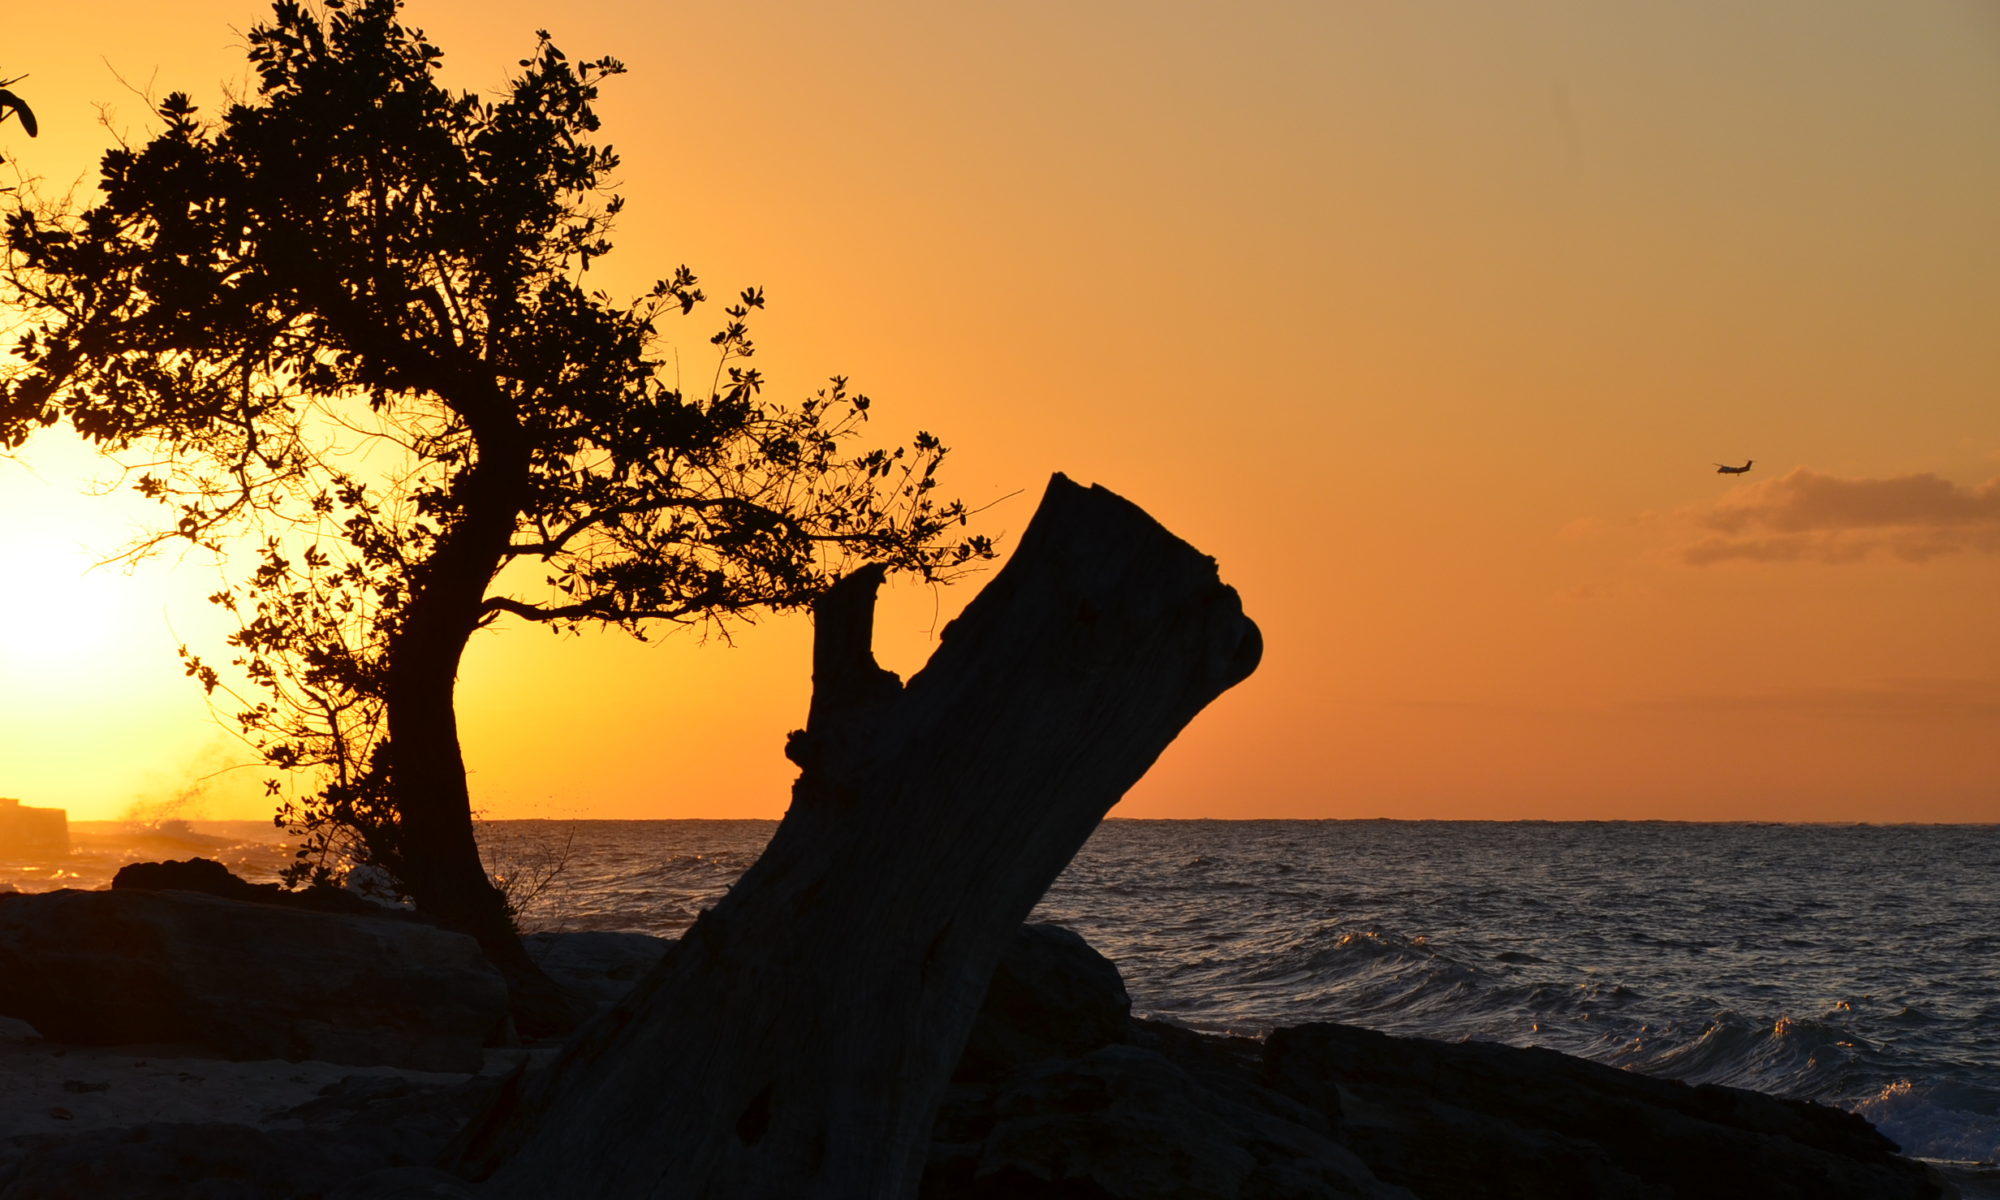 Golden sunset shining through a tree and a large stump on an ocean beach || 10 Quotes That Will Inspire You To See The World With Wonder And Curiosity Every Day